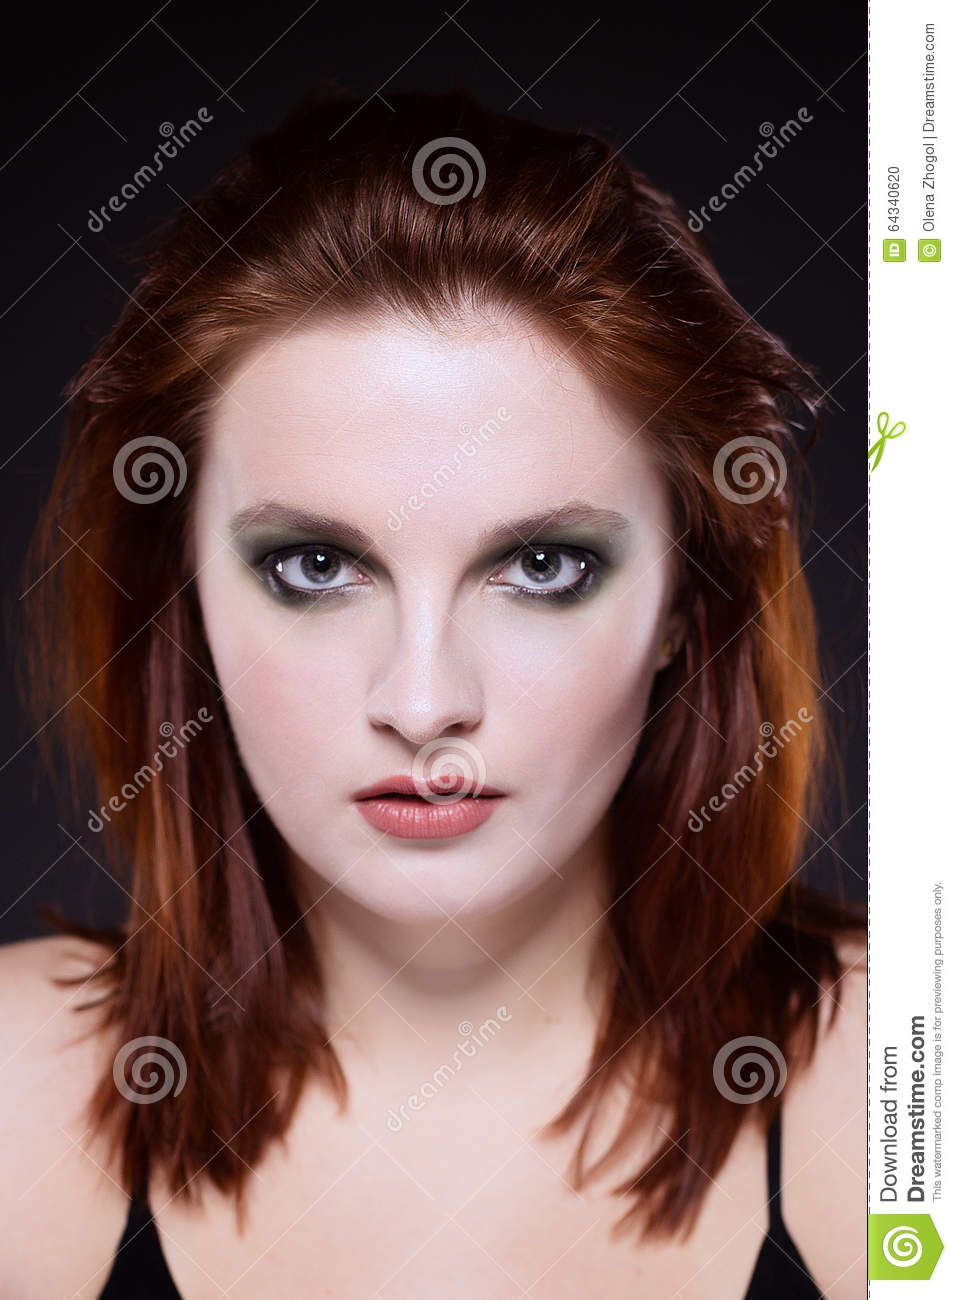 Makeup For Grey Hair And Green Eyes Redhaed Girl With Greensmoky Eyes Makeup Stock Photo Image Of Hair